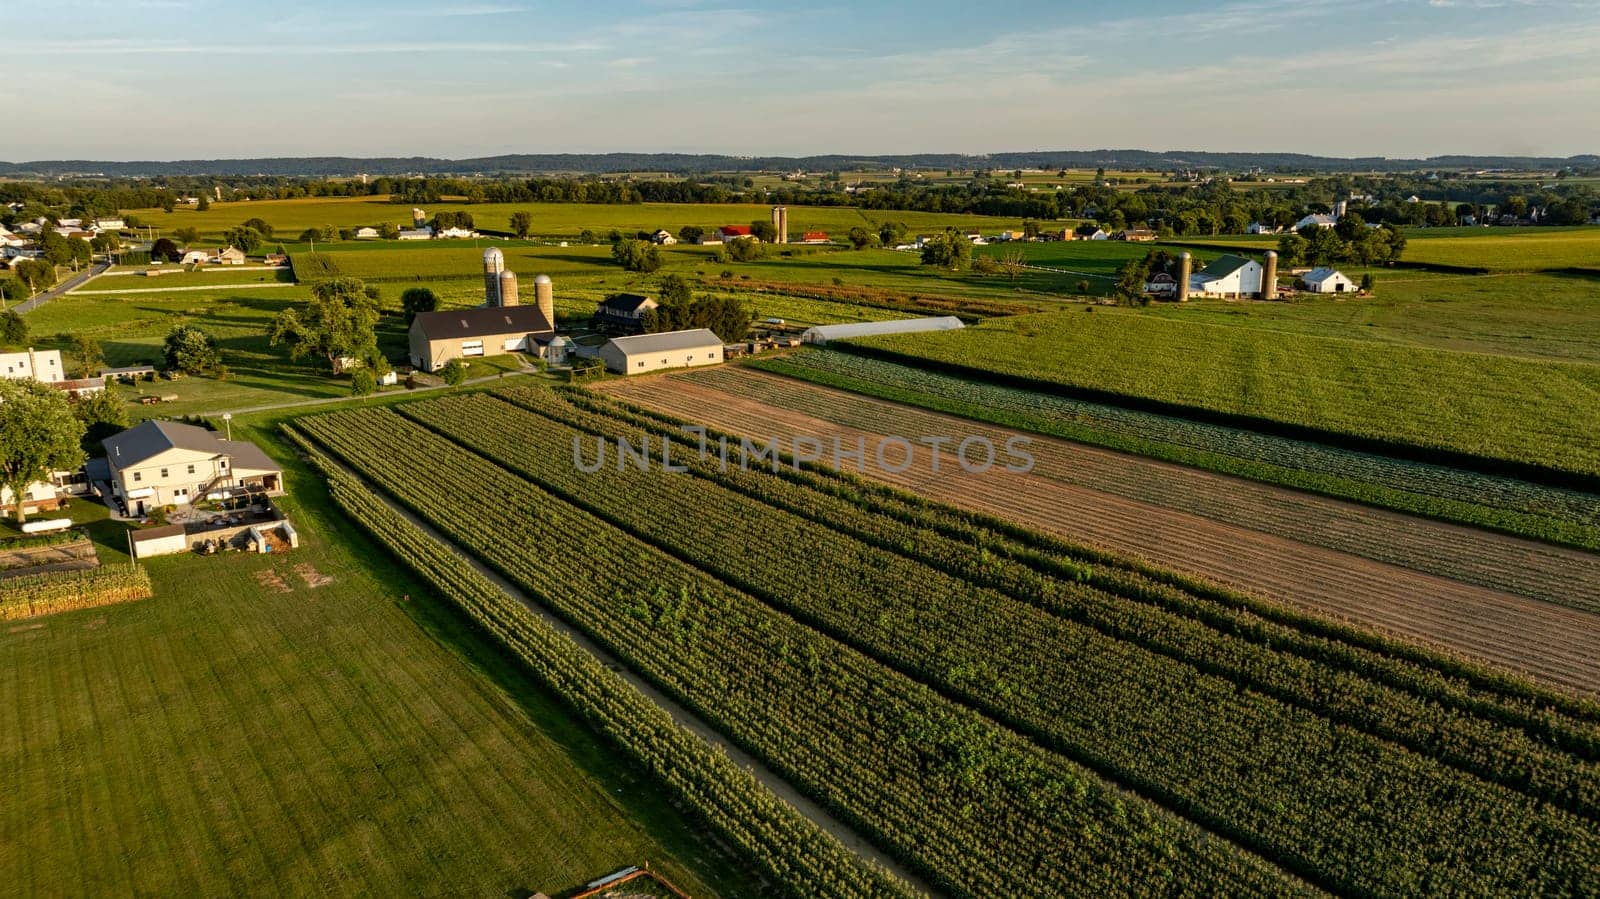 An Aerial View of Rural Farmland and Buildings at Dusk